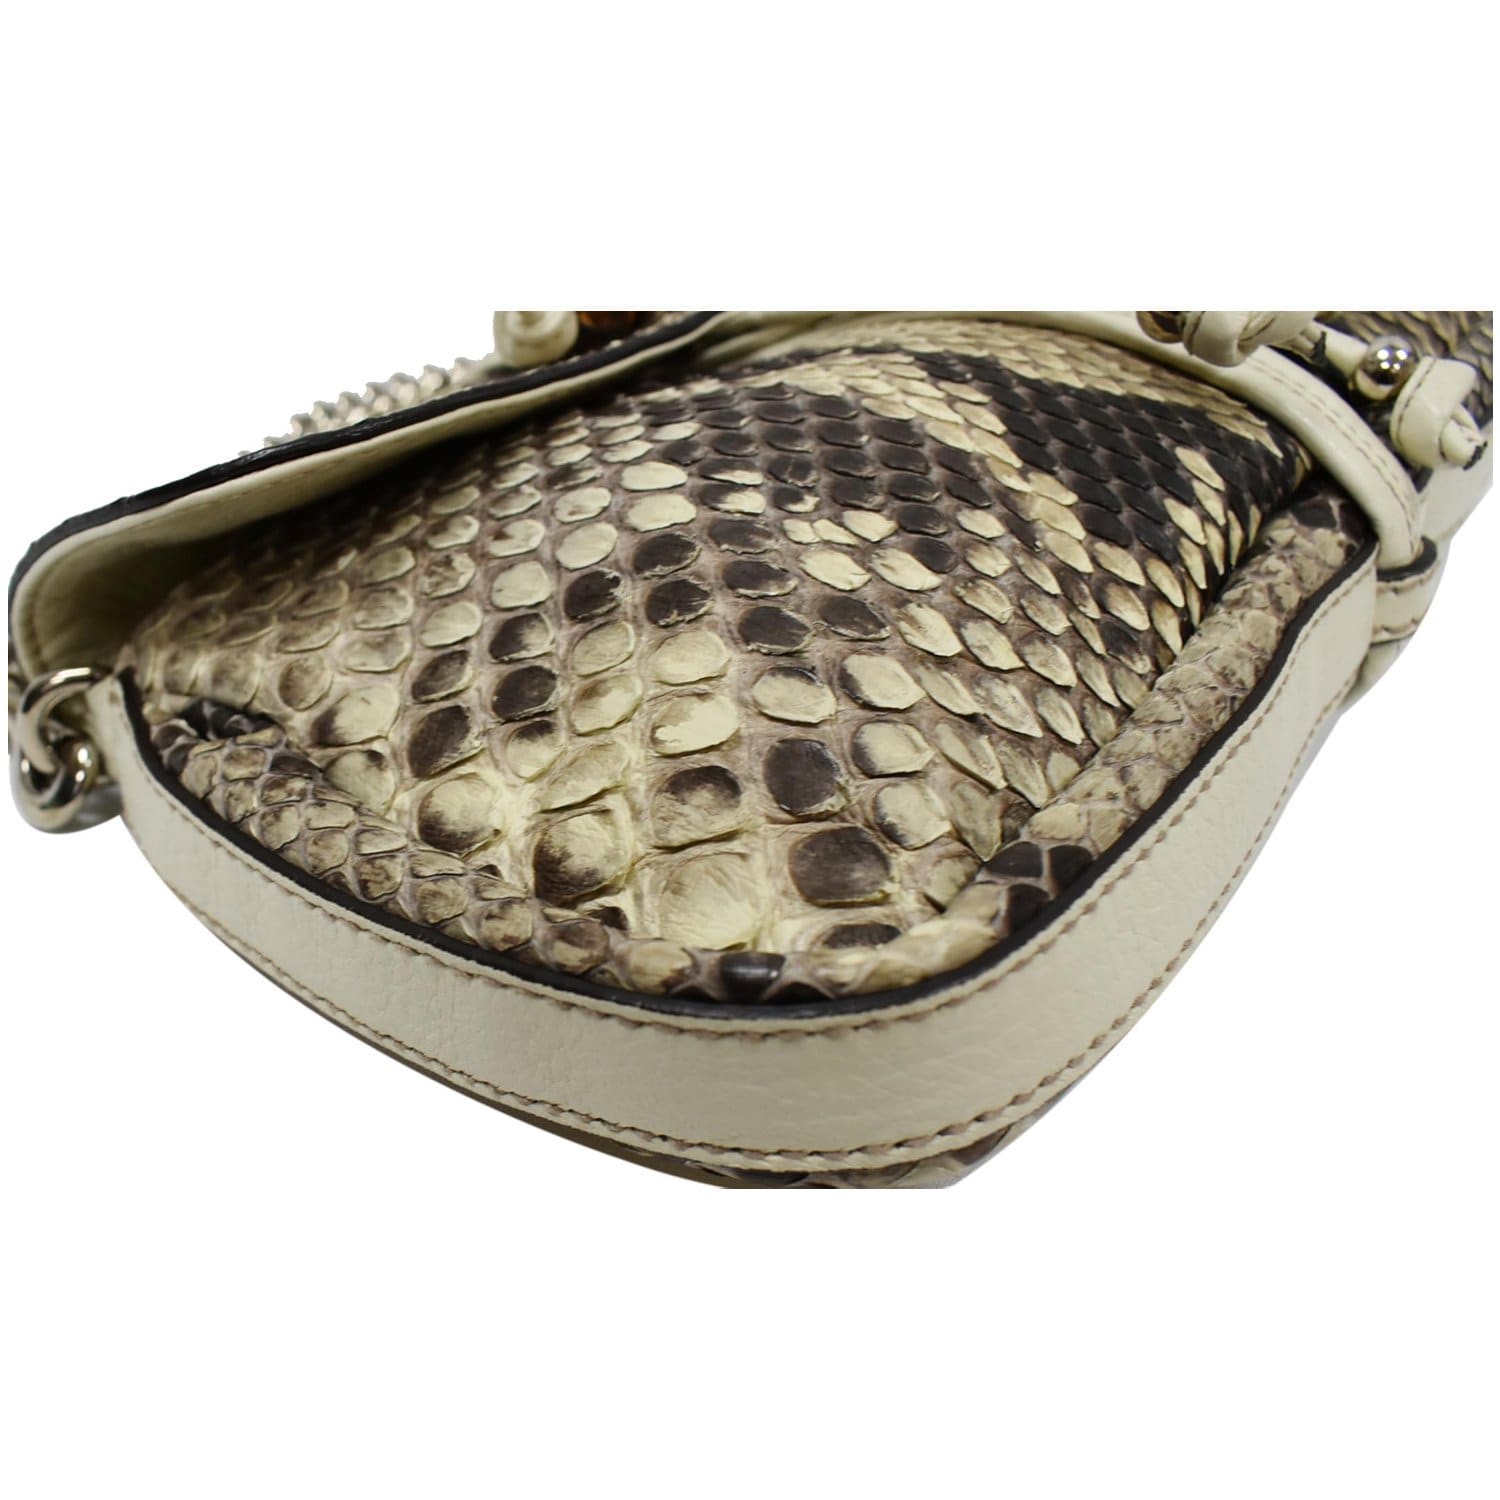 Gucci Bamboo Croisette Evening Bag - ShopStyle